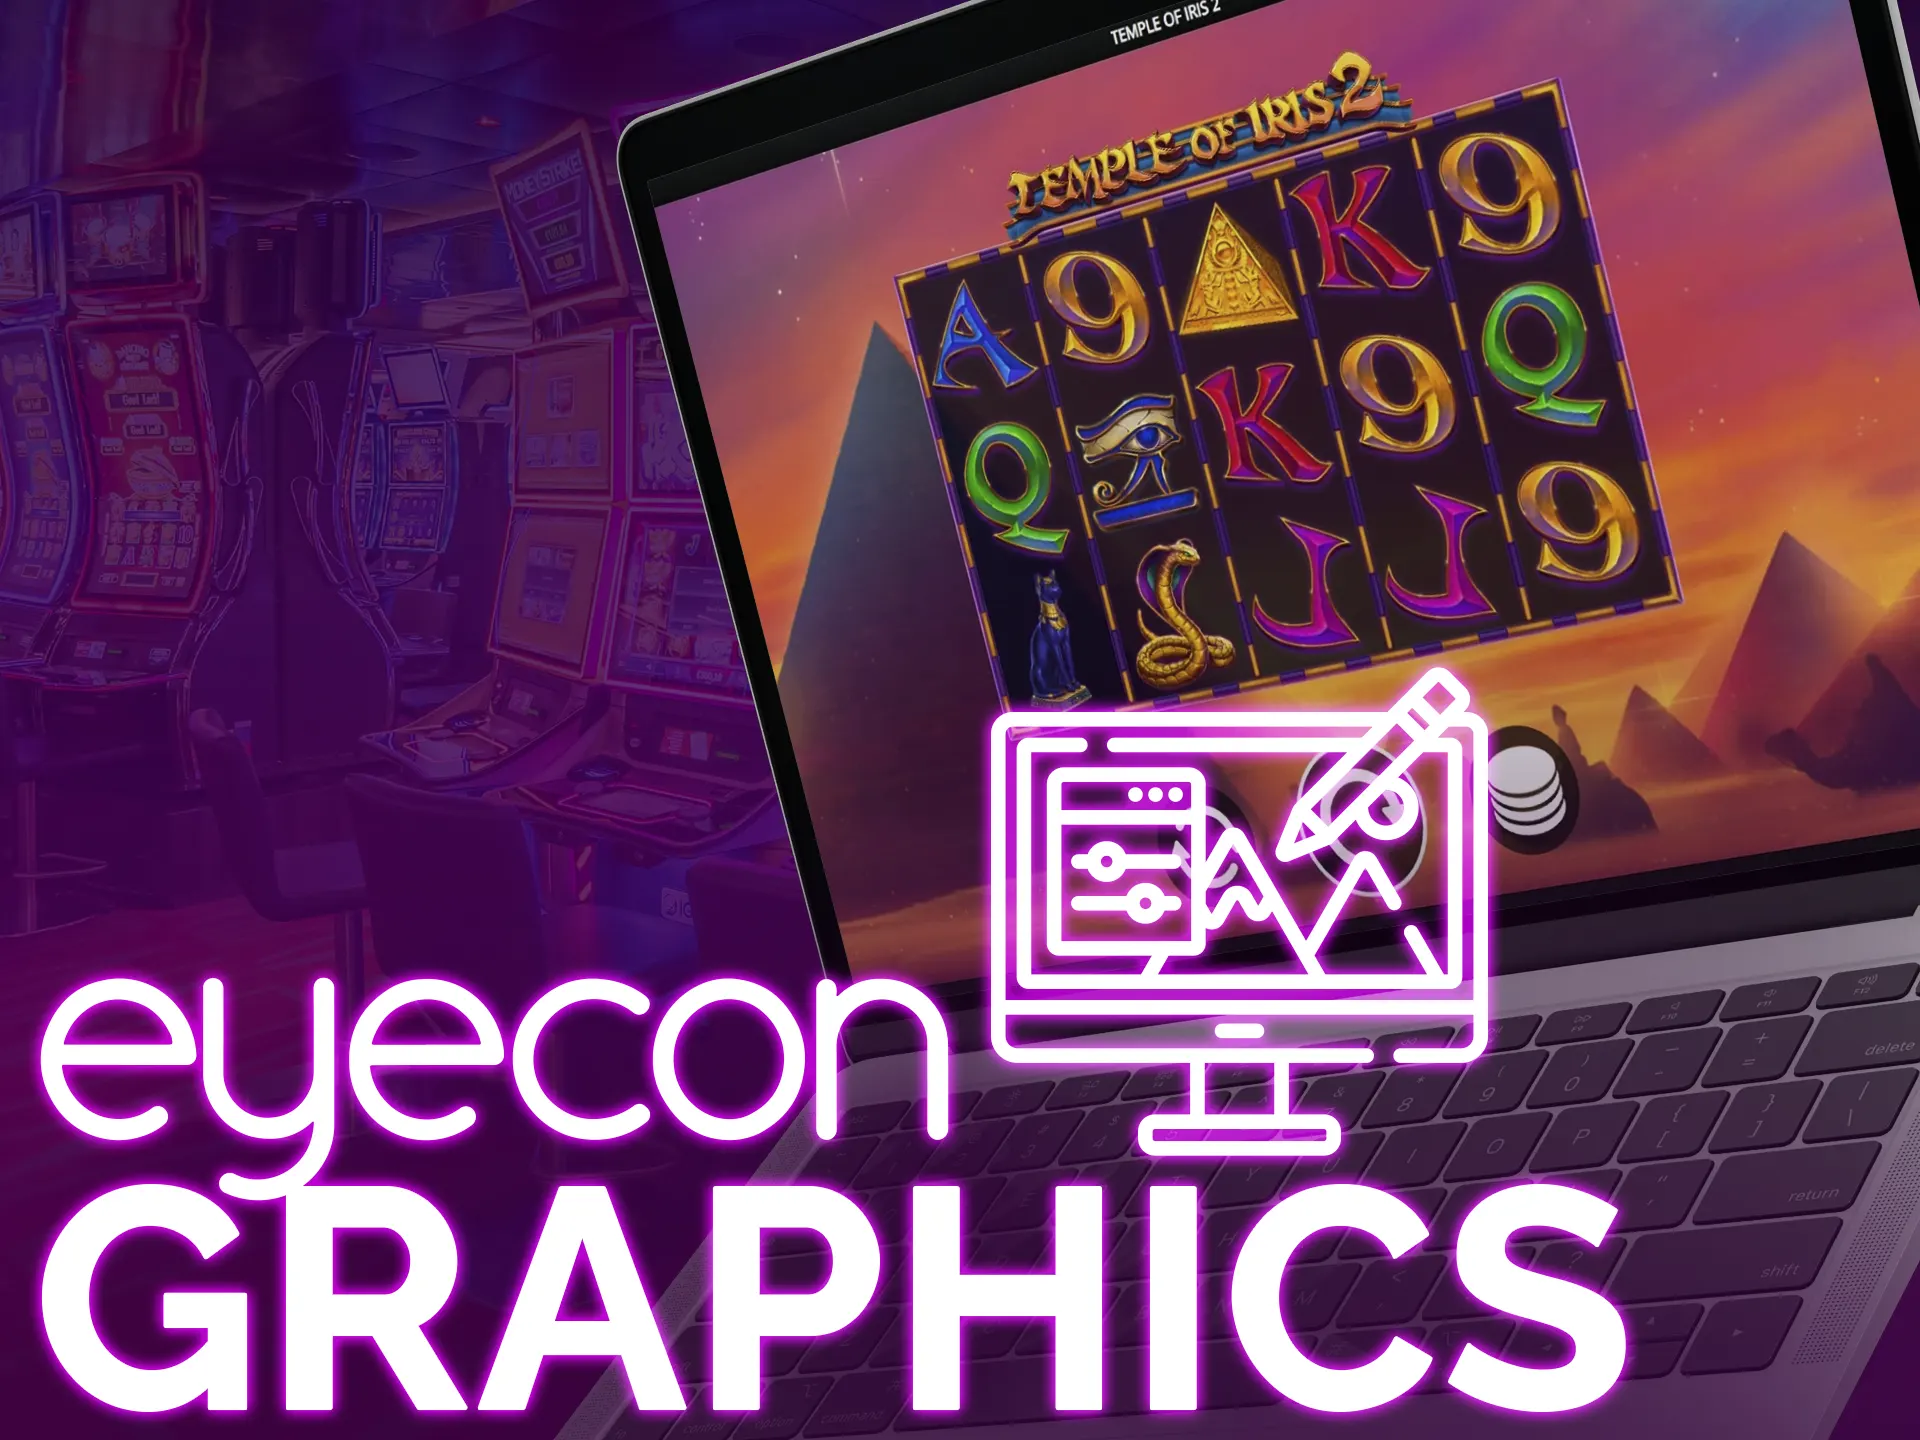 Eyecon games: vivid graphics, unique design, HD resolution for players' appeal.